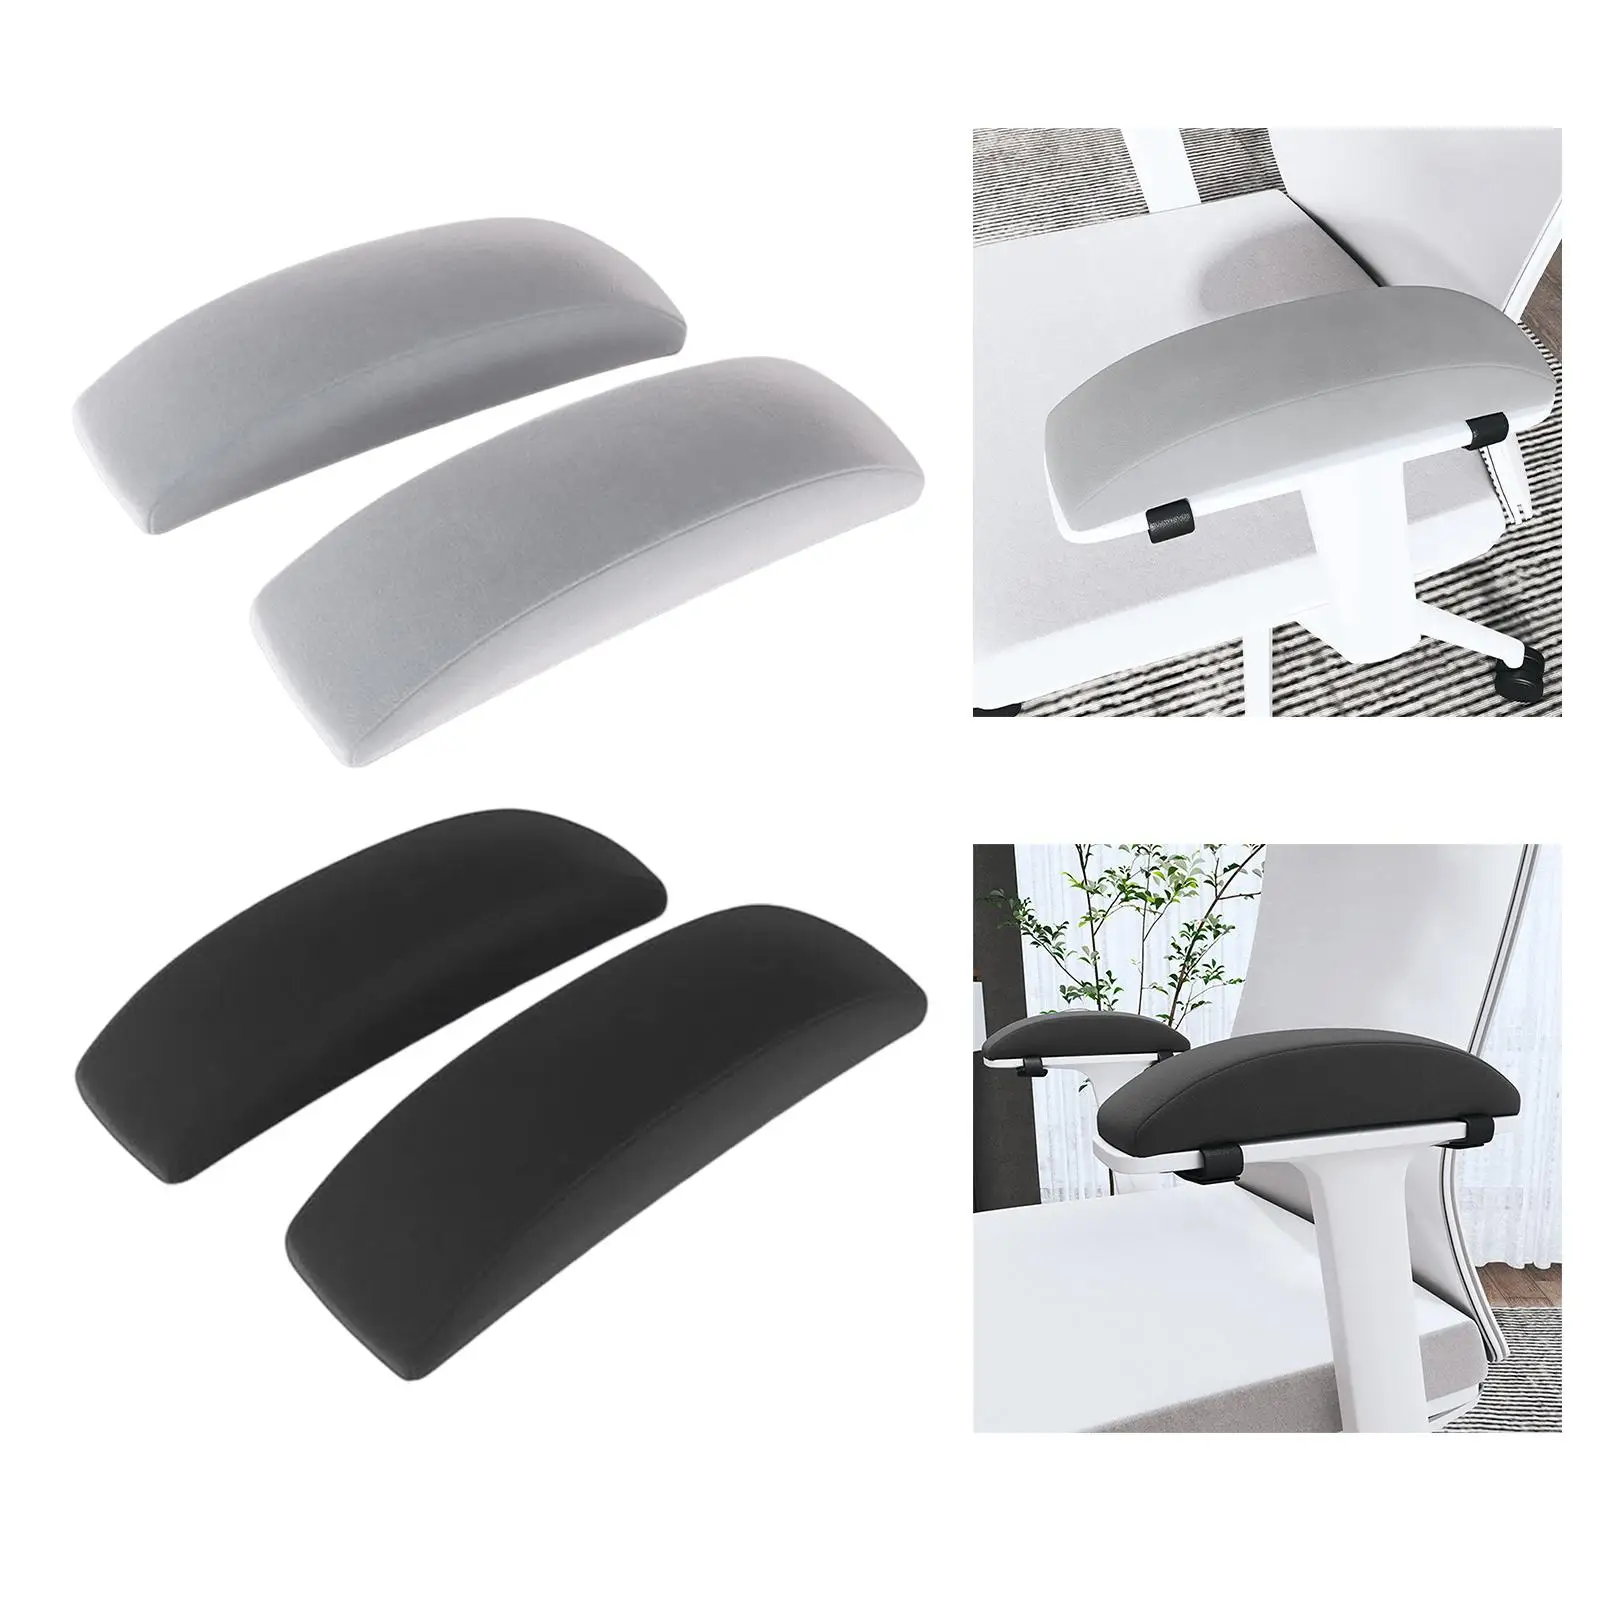 2x Armrest Cushions Comfortable Support Washable Removable Soft Portable for Home Office Chair Computer Chair Gaming Chair Home